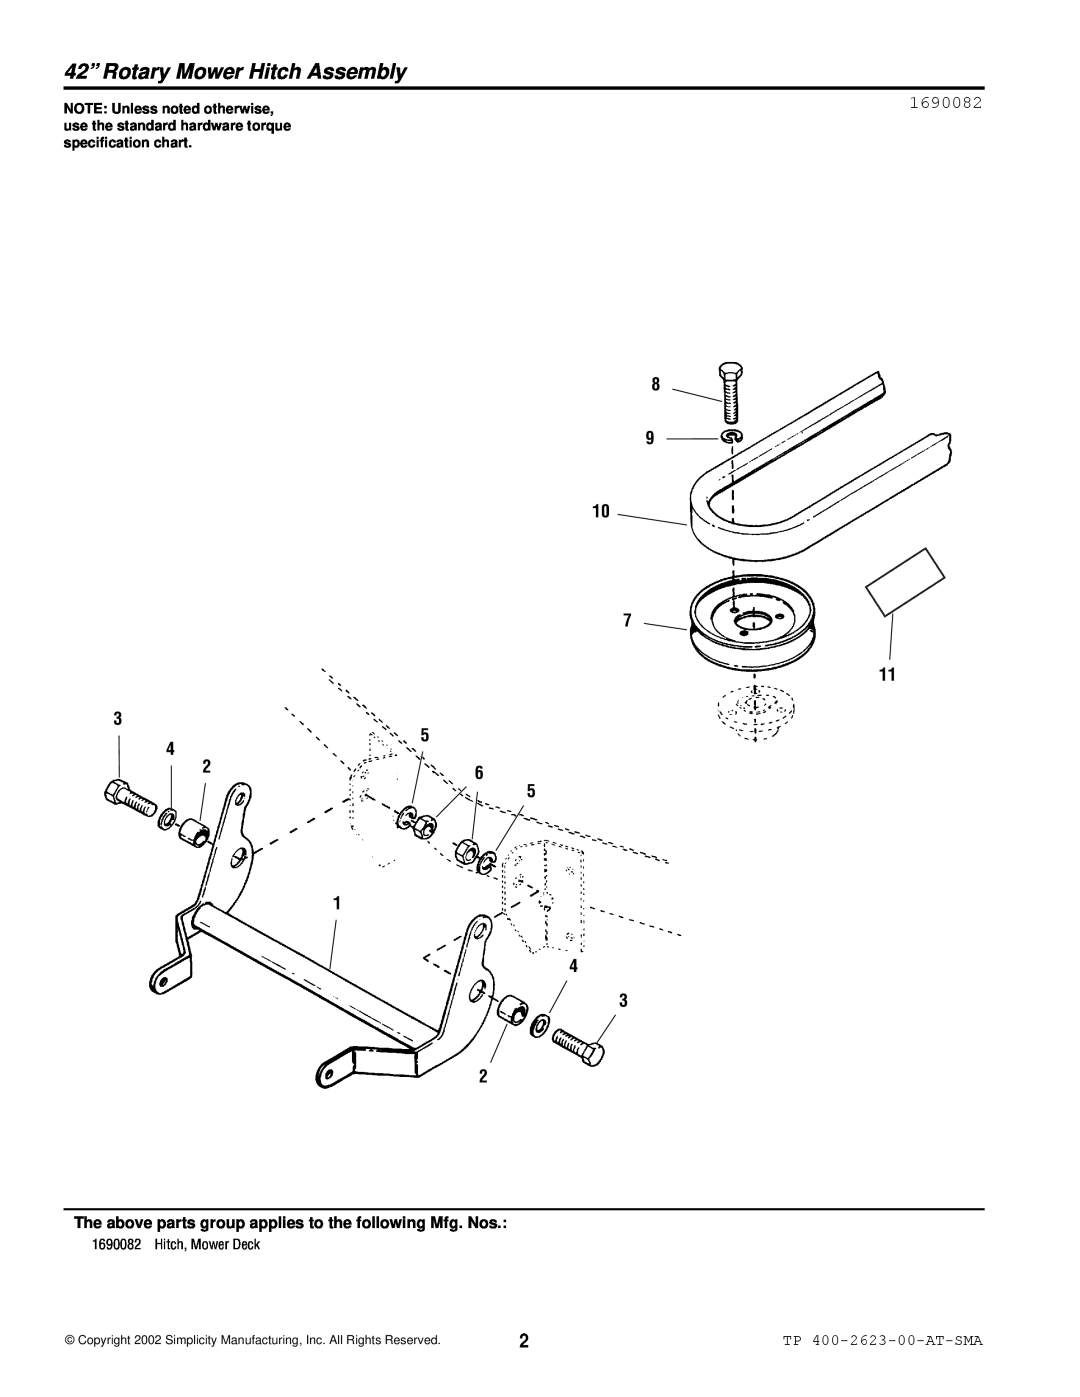 Snapper manual 42” Rotary Mower Hitch Assembly, 1690082, TP 400-2623-00-AT-SMA 